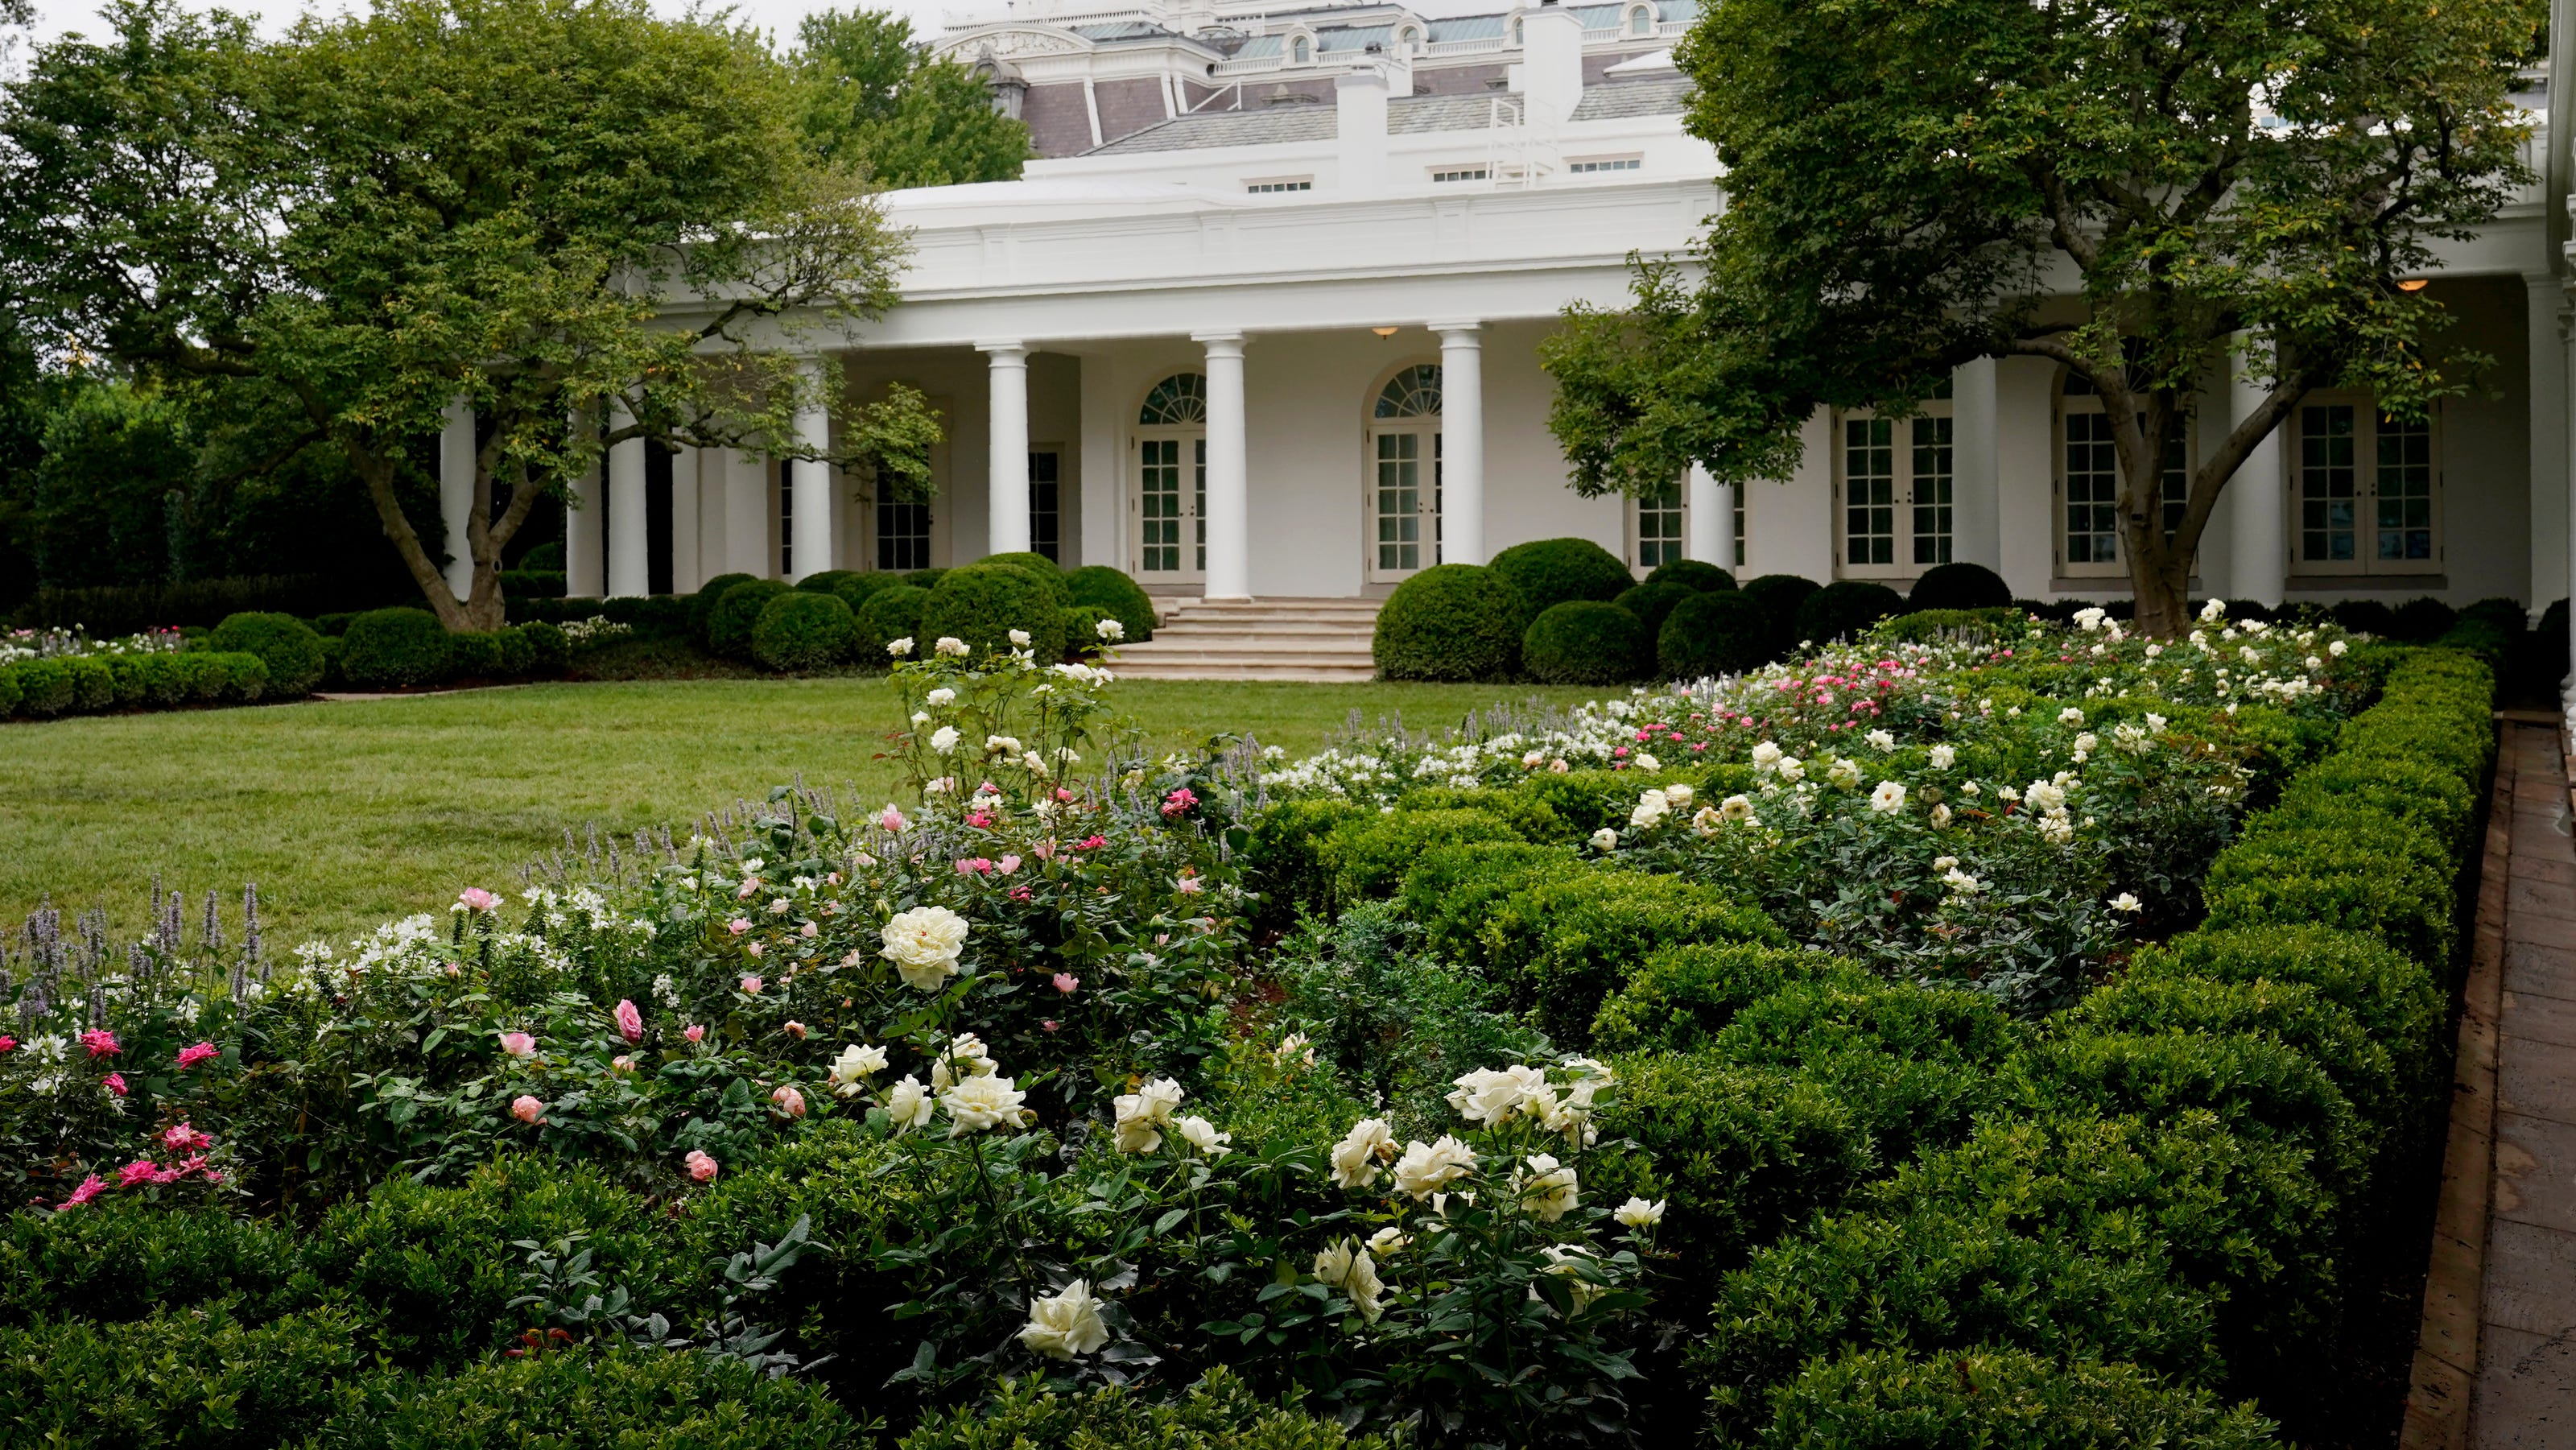 Melania Trump and the Rose Garden: renovations leave it dull and pale